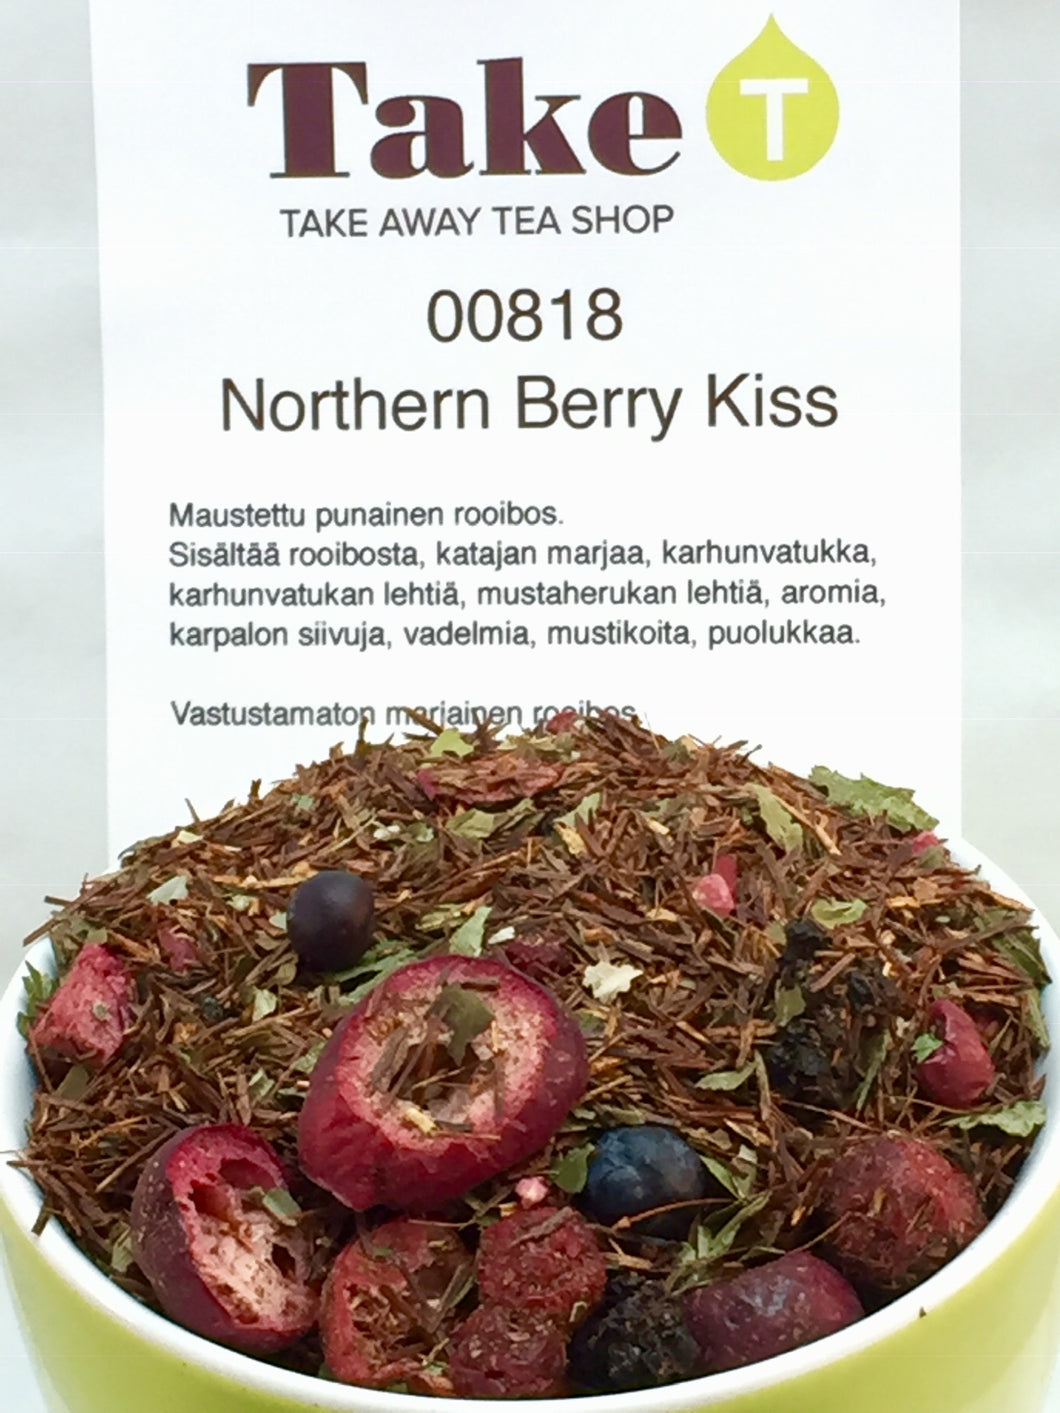 Northern Berry Kiss